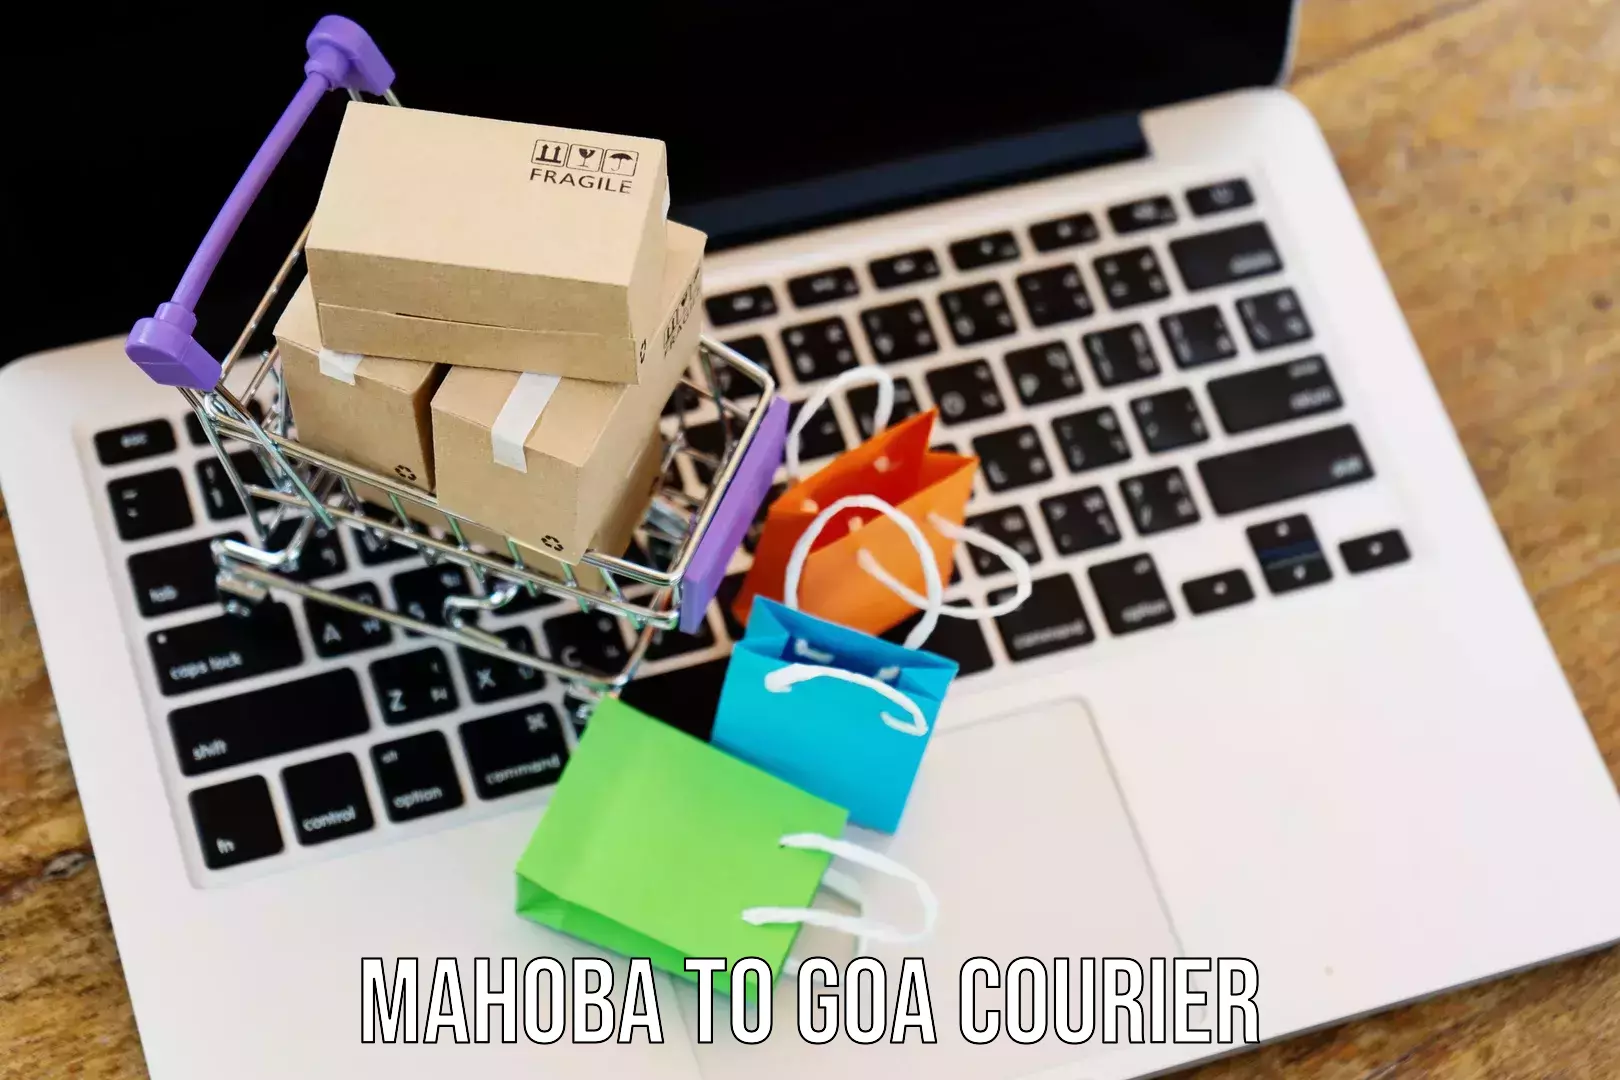 User-friendly delivery service Mahoba to Goa